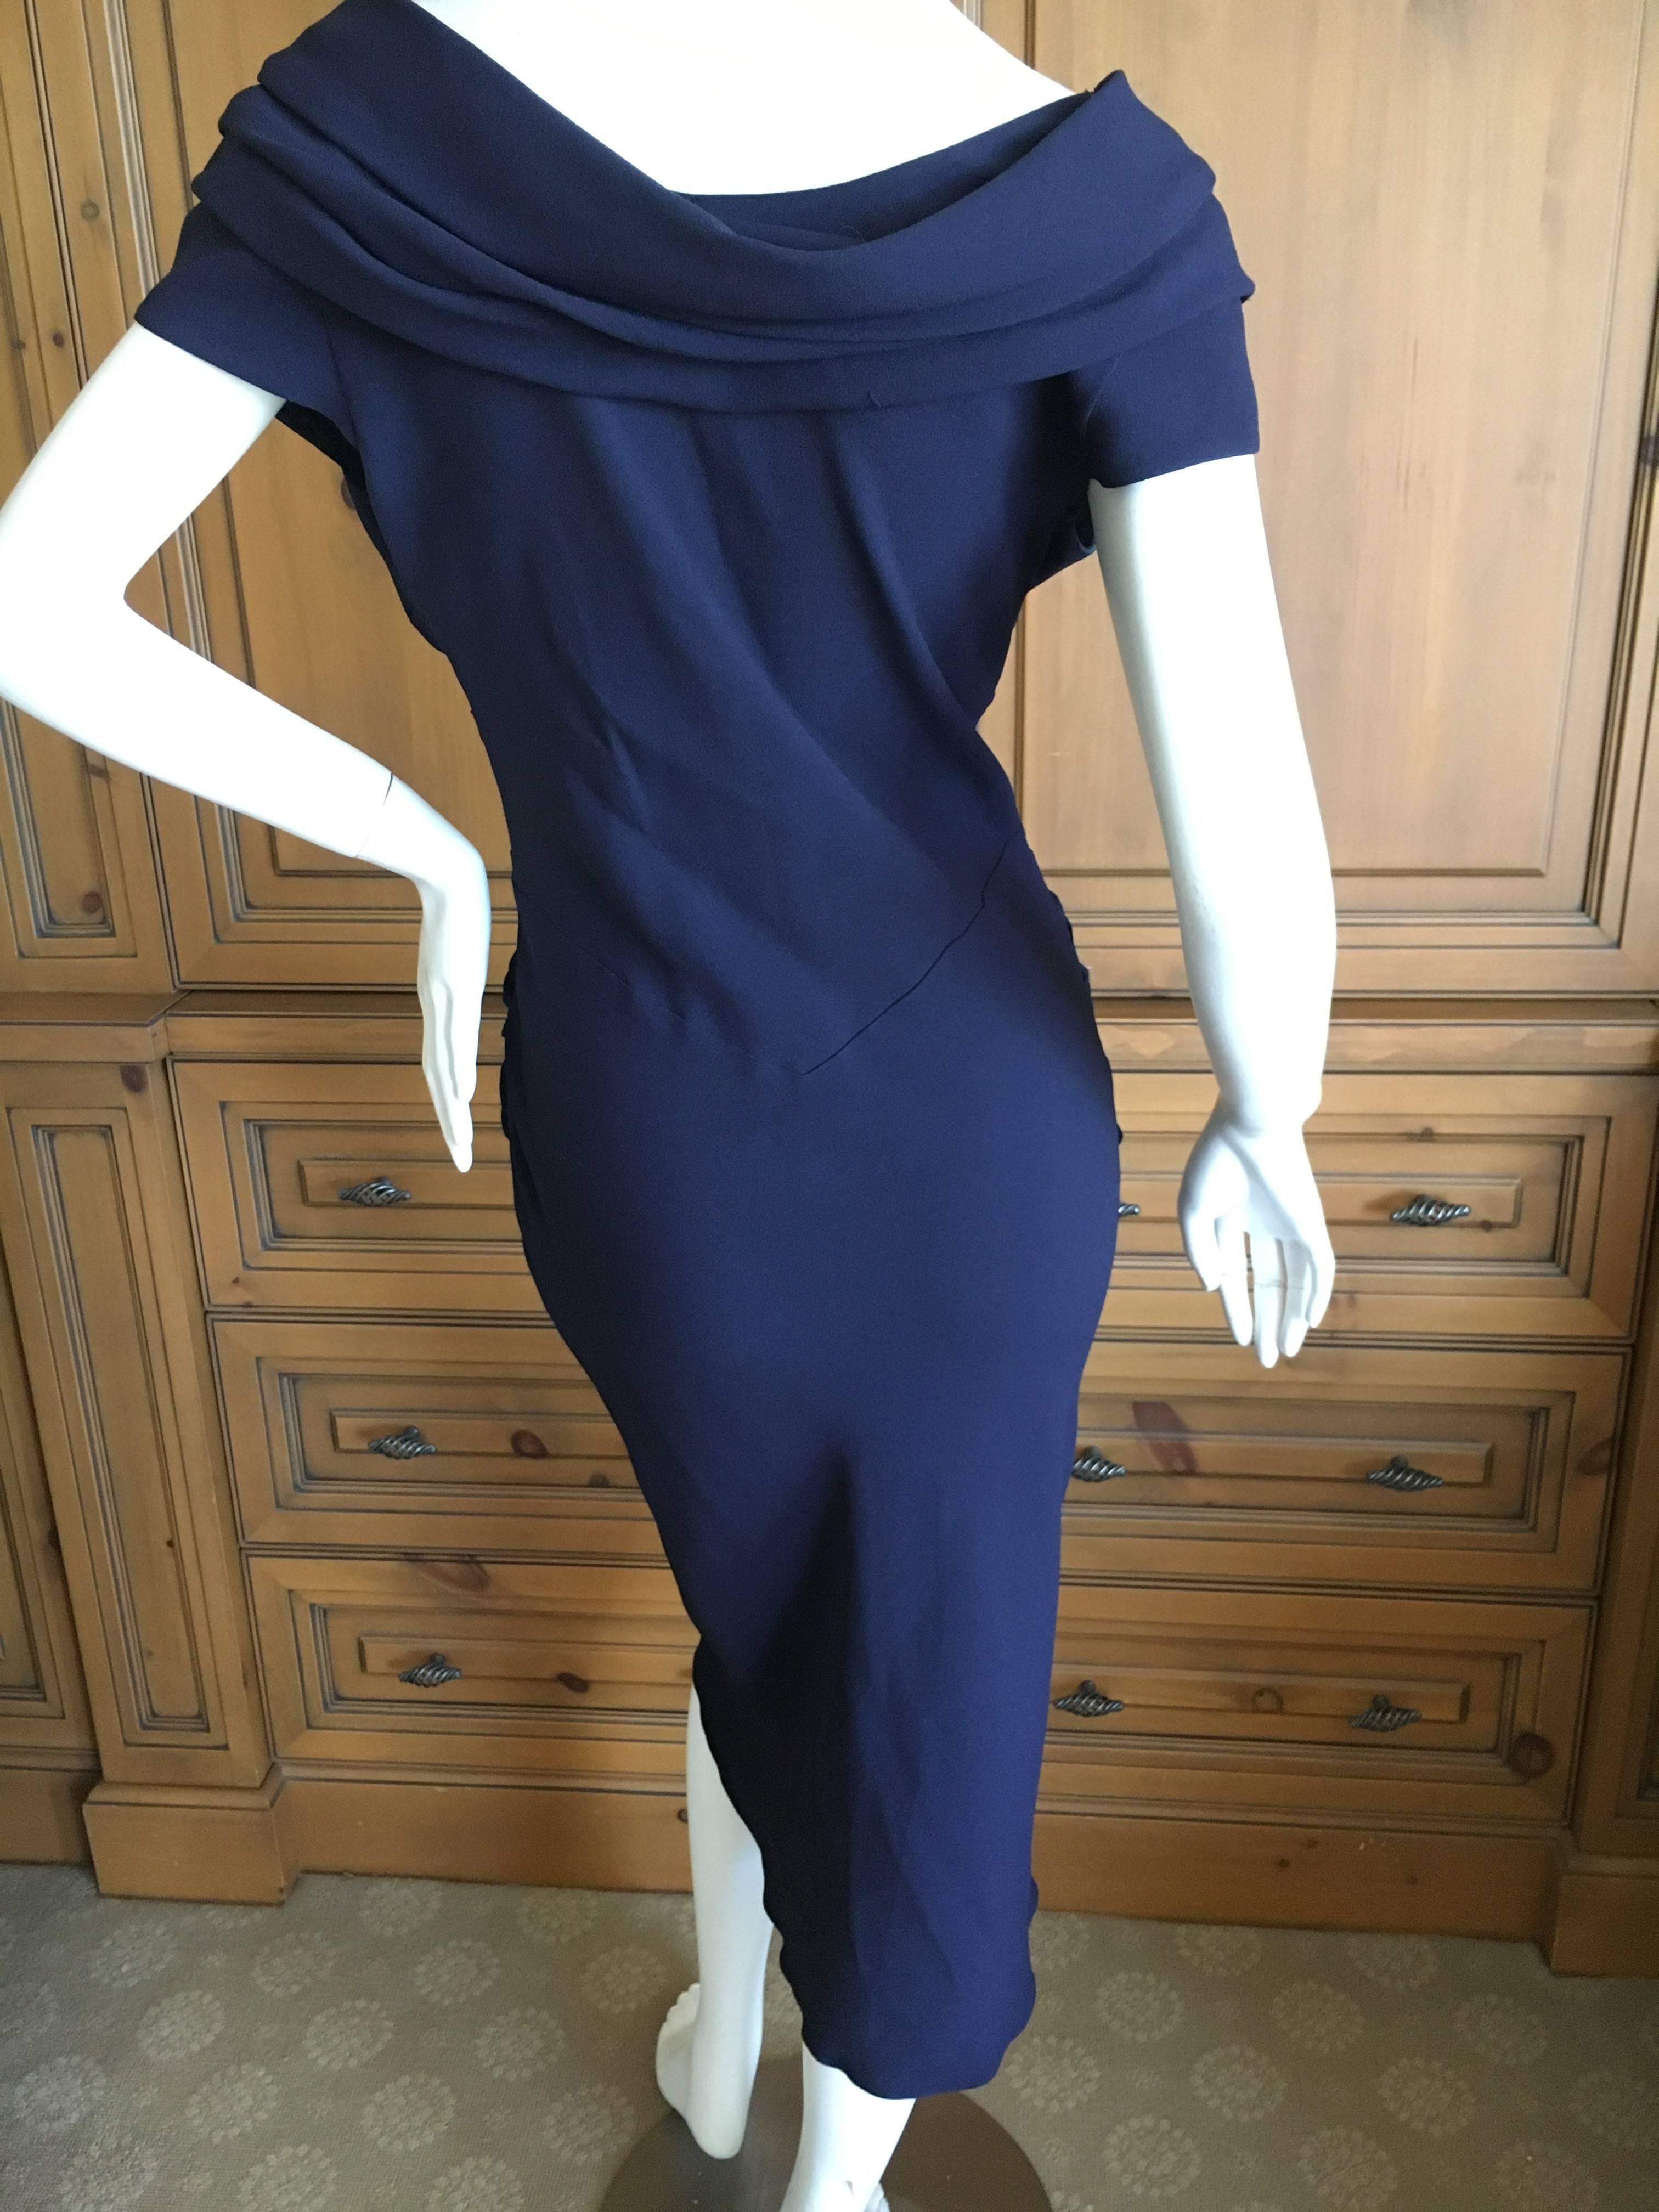 Christian Dior by John Galliano Low Cut Navy Blue Cocktail Dress For Sale 1